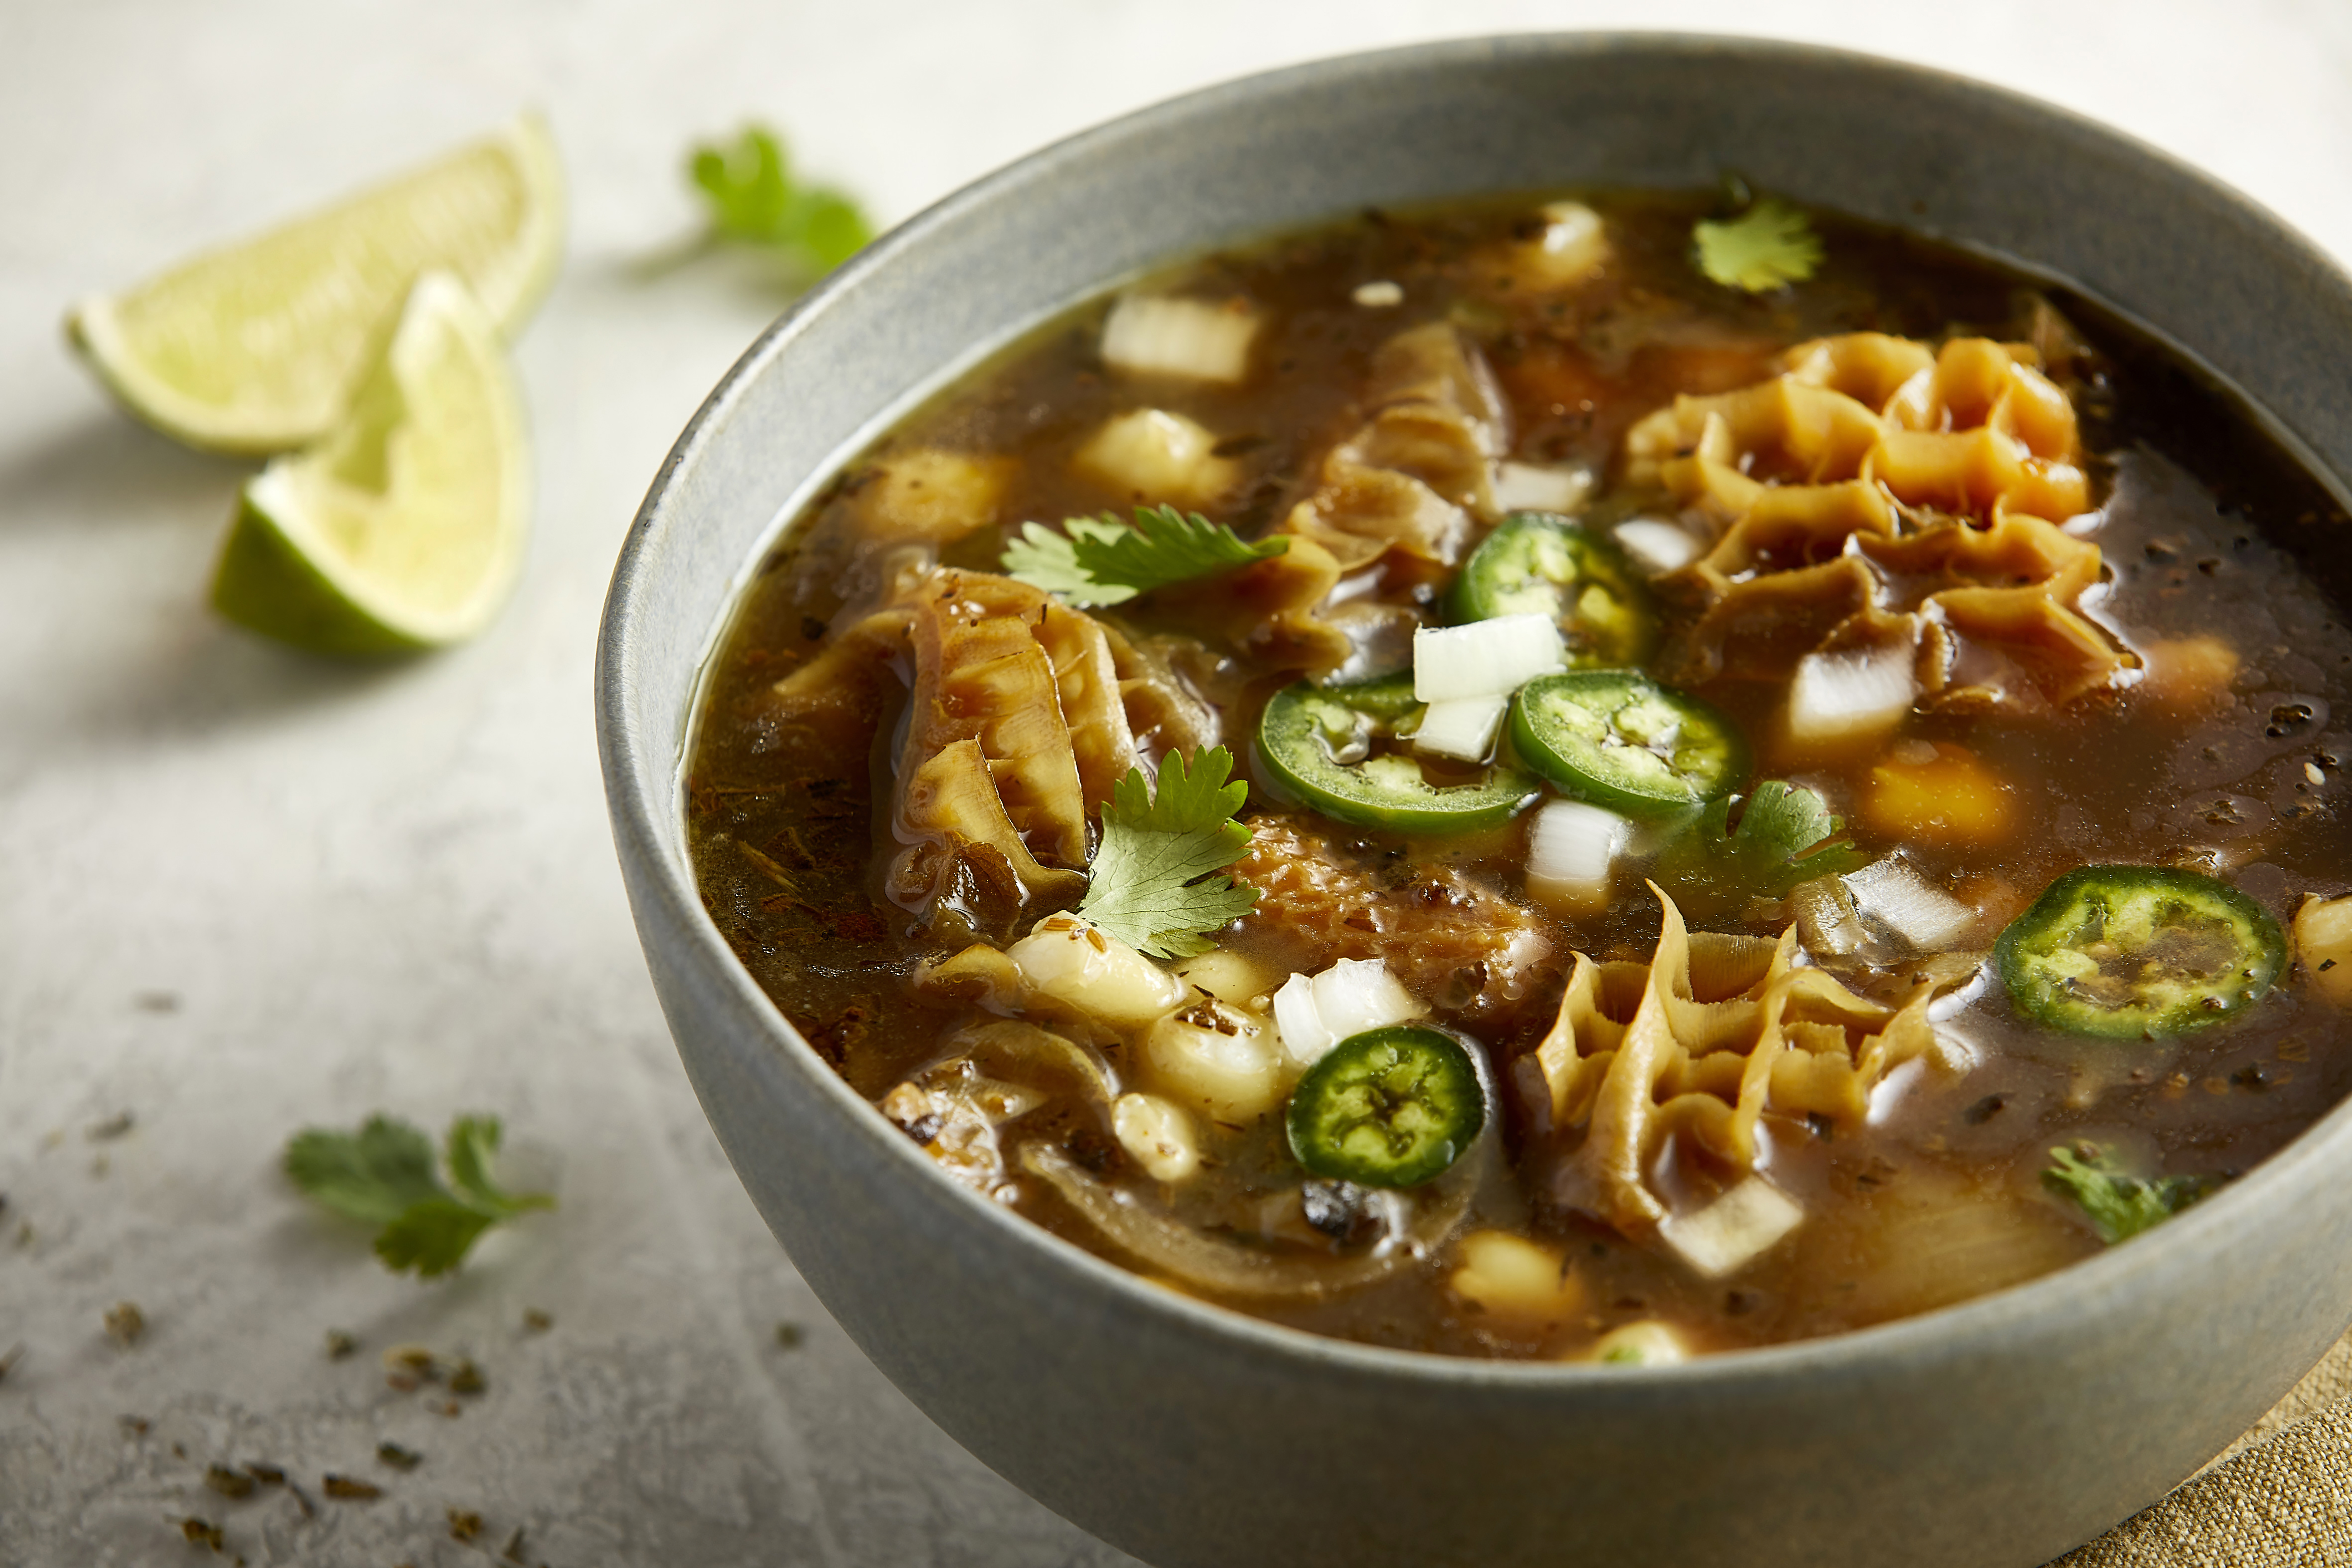 National Beef tripe soup